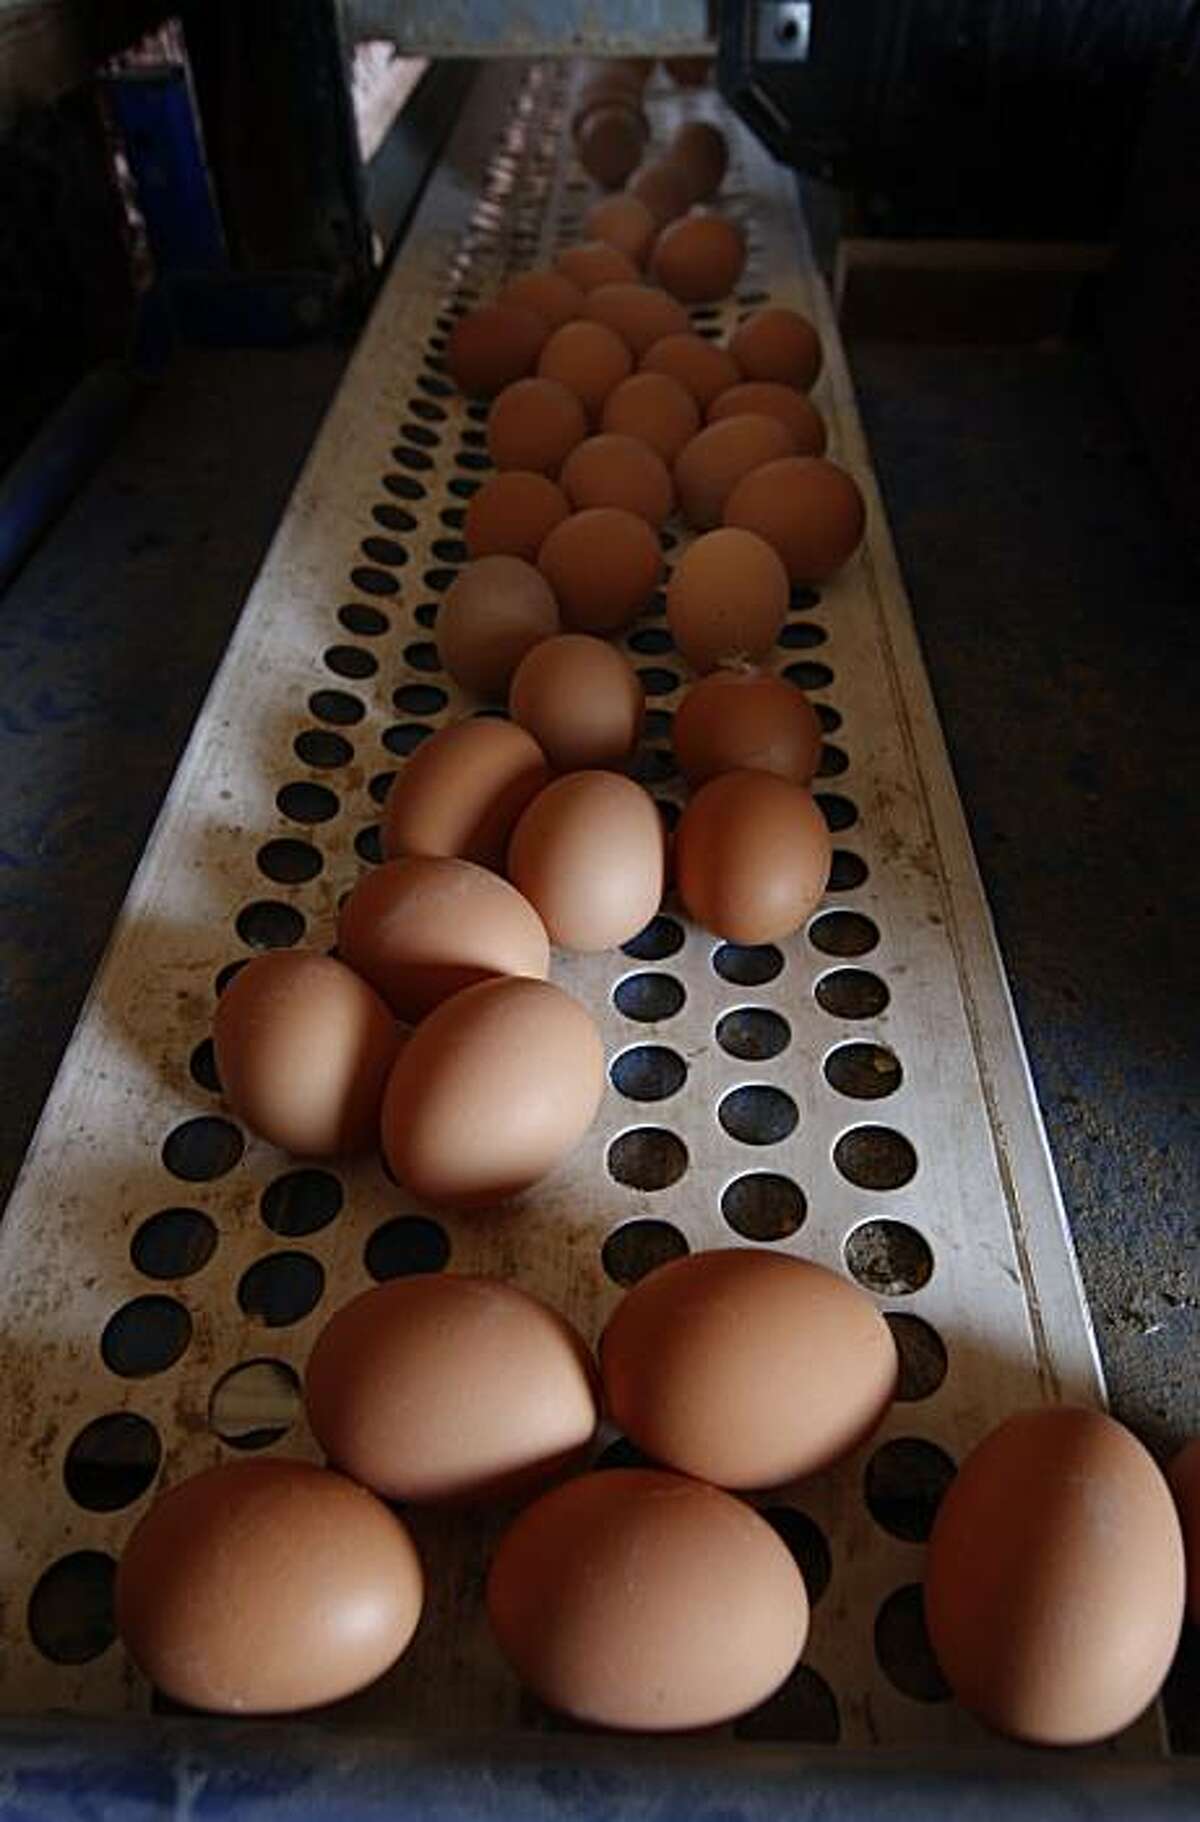 Freshly-laid brown eggs roll down a conveyor belt in an organic hen house at Sunrise Farms in Petaluma, Calif. on Wednesday, Aug. 25, 2010 which produces about a million eggs a day from a hen population of 1.2 million. No eggs produced in California has been recalled because the salmonella scare.